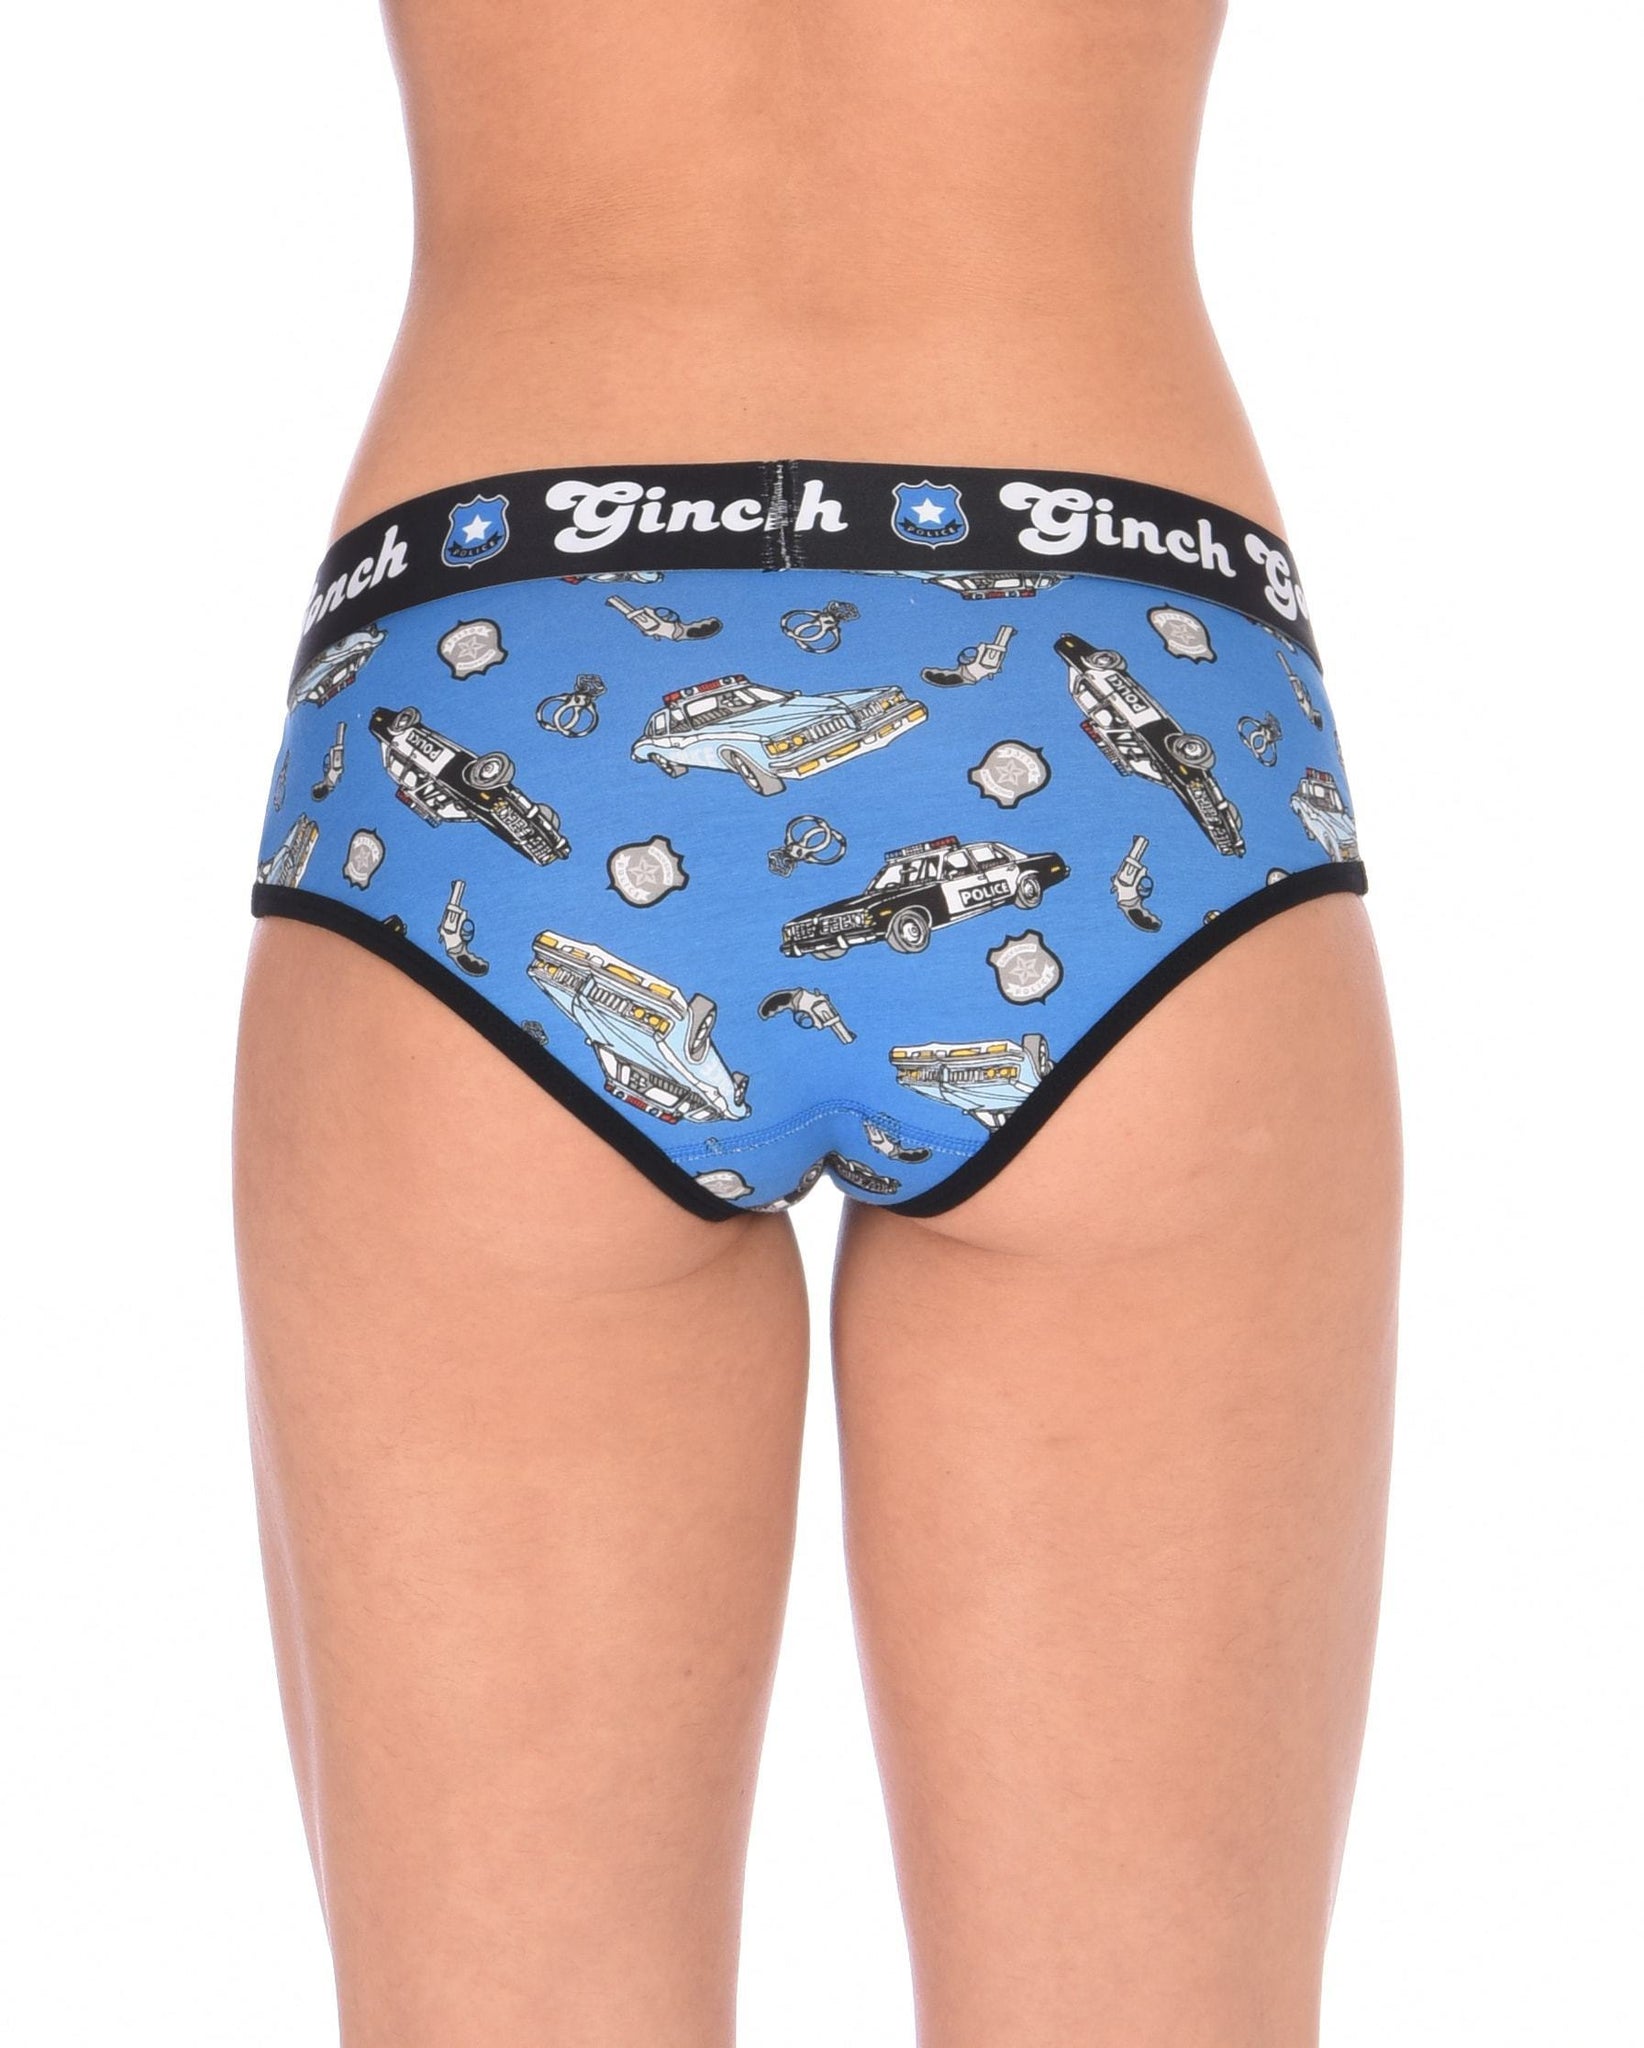 Ginch Gonch GG Patrol boy cut y front Brief women's underwear blue fabric with cop cars, badges, hand cuffs, and guns. Black trim and black printed waistband back